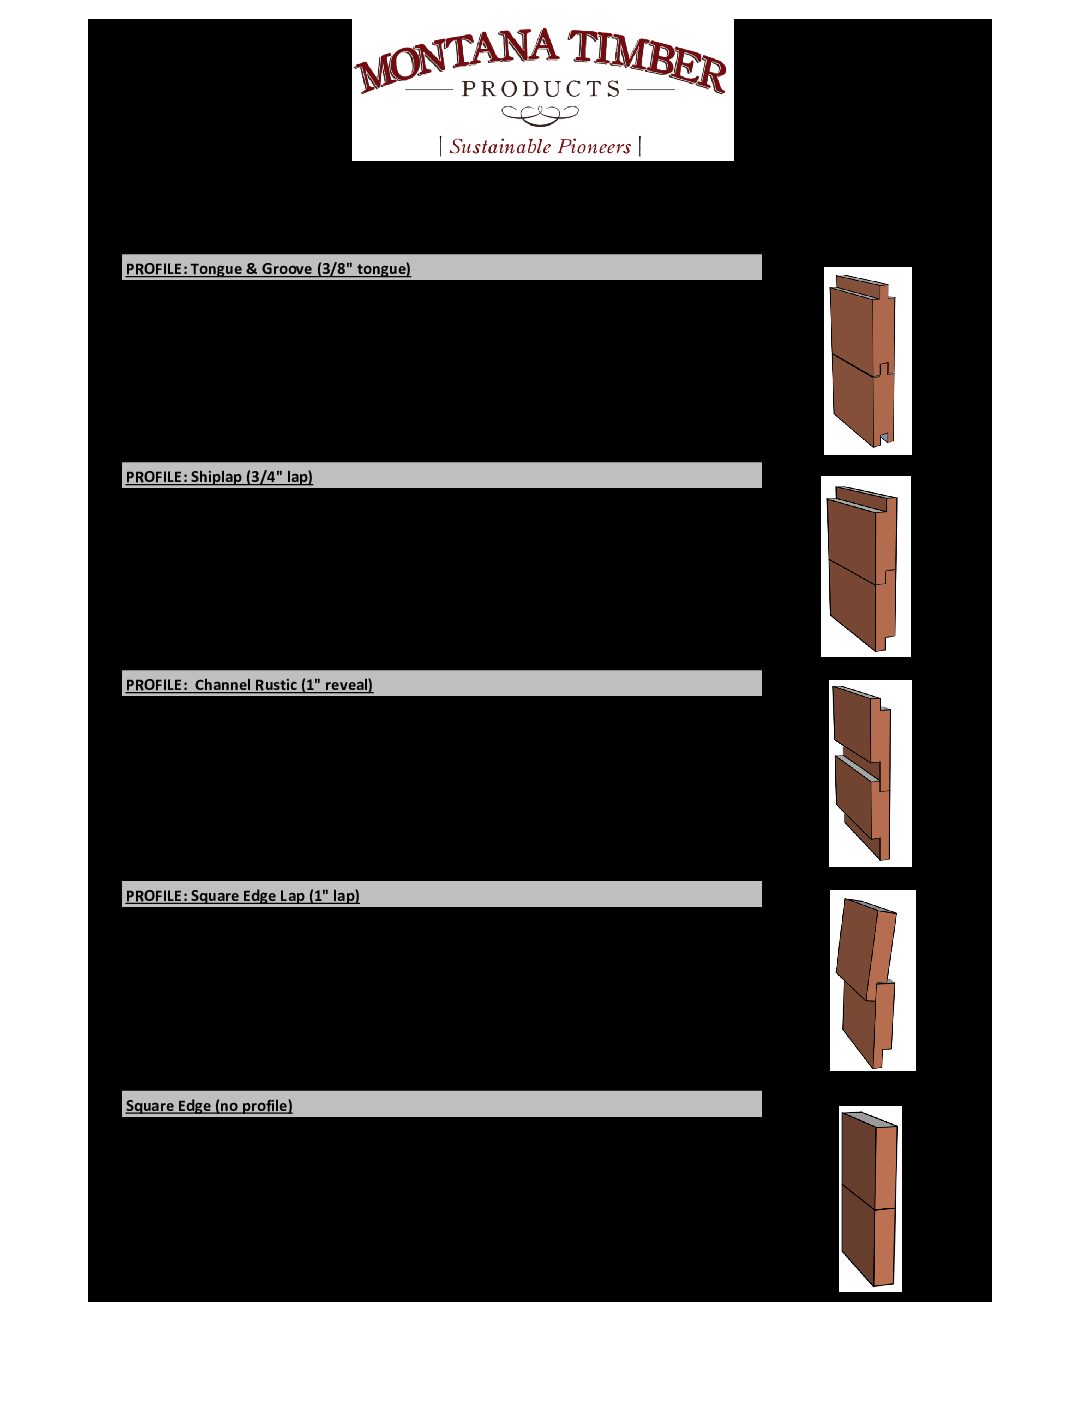 Face Coverage & Profile Specifications (Doug Fir)